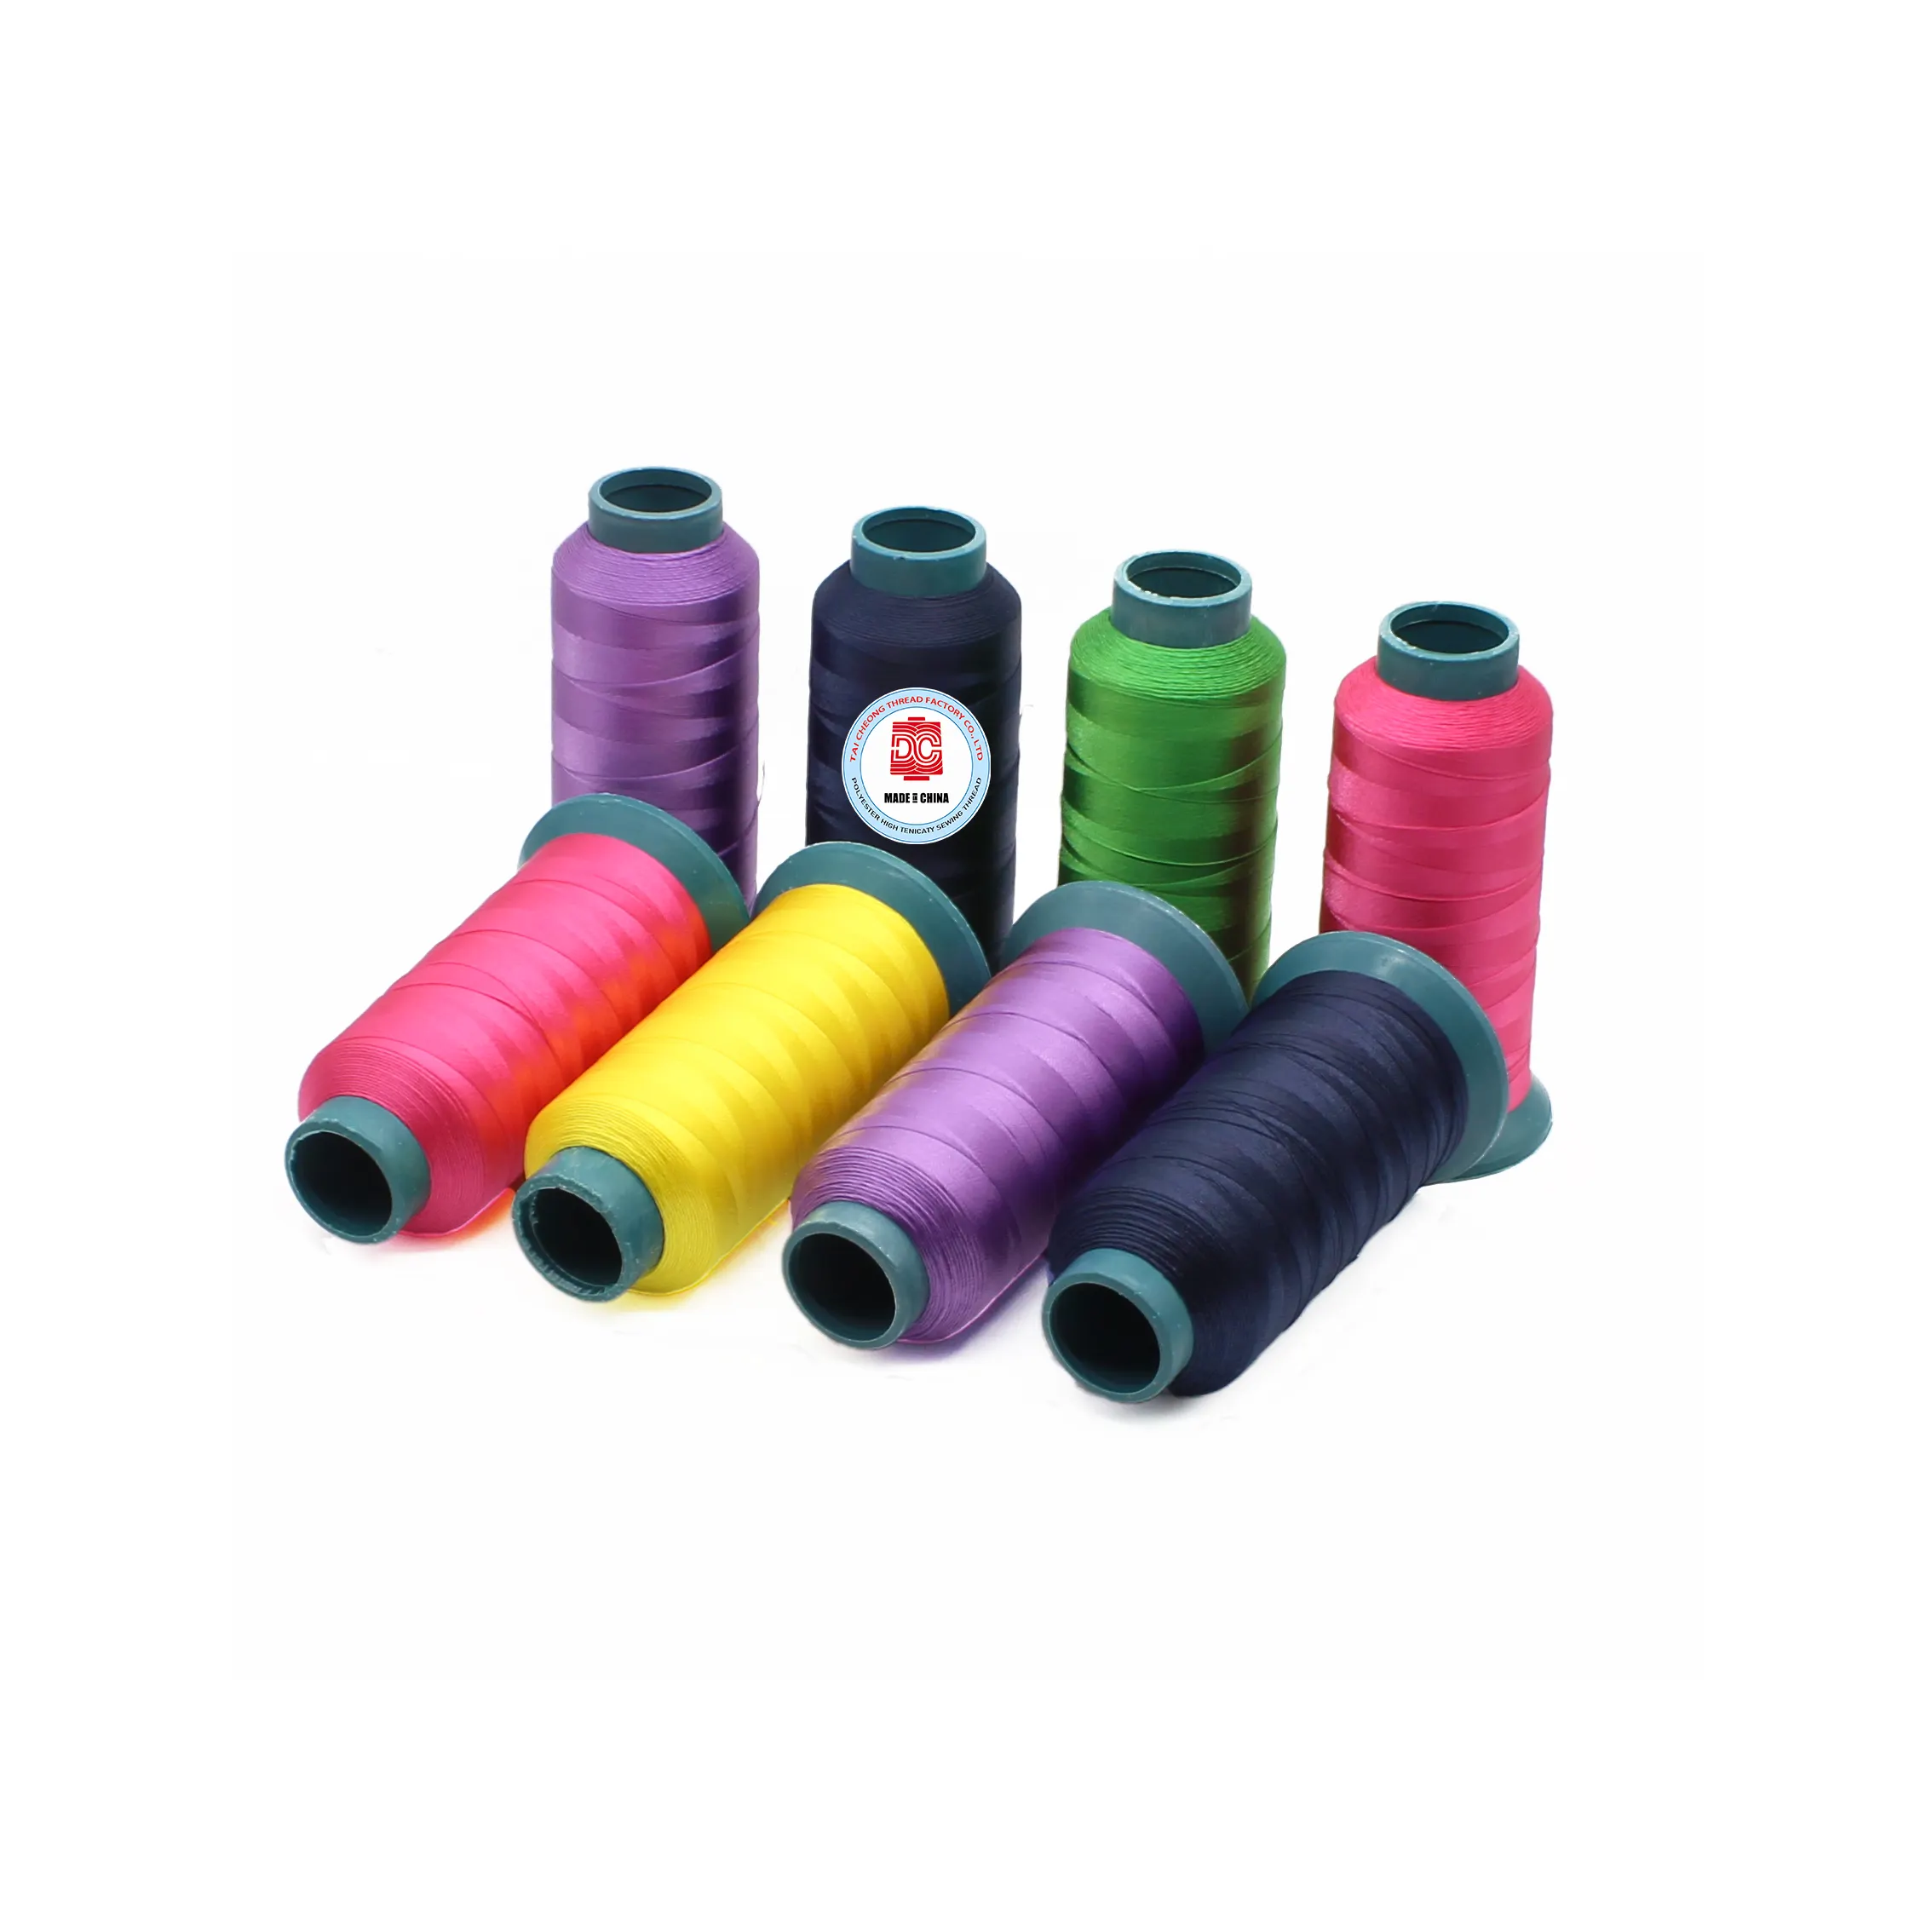 For Weaving Tailor Polyester Sewing Thread Z Tex 70 75D 2 150D 1110 Dtex 1000D Polyeste No Oil Rolls Set Without Colors Waxed